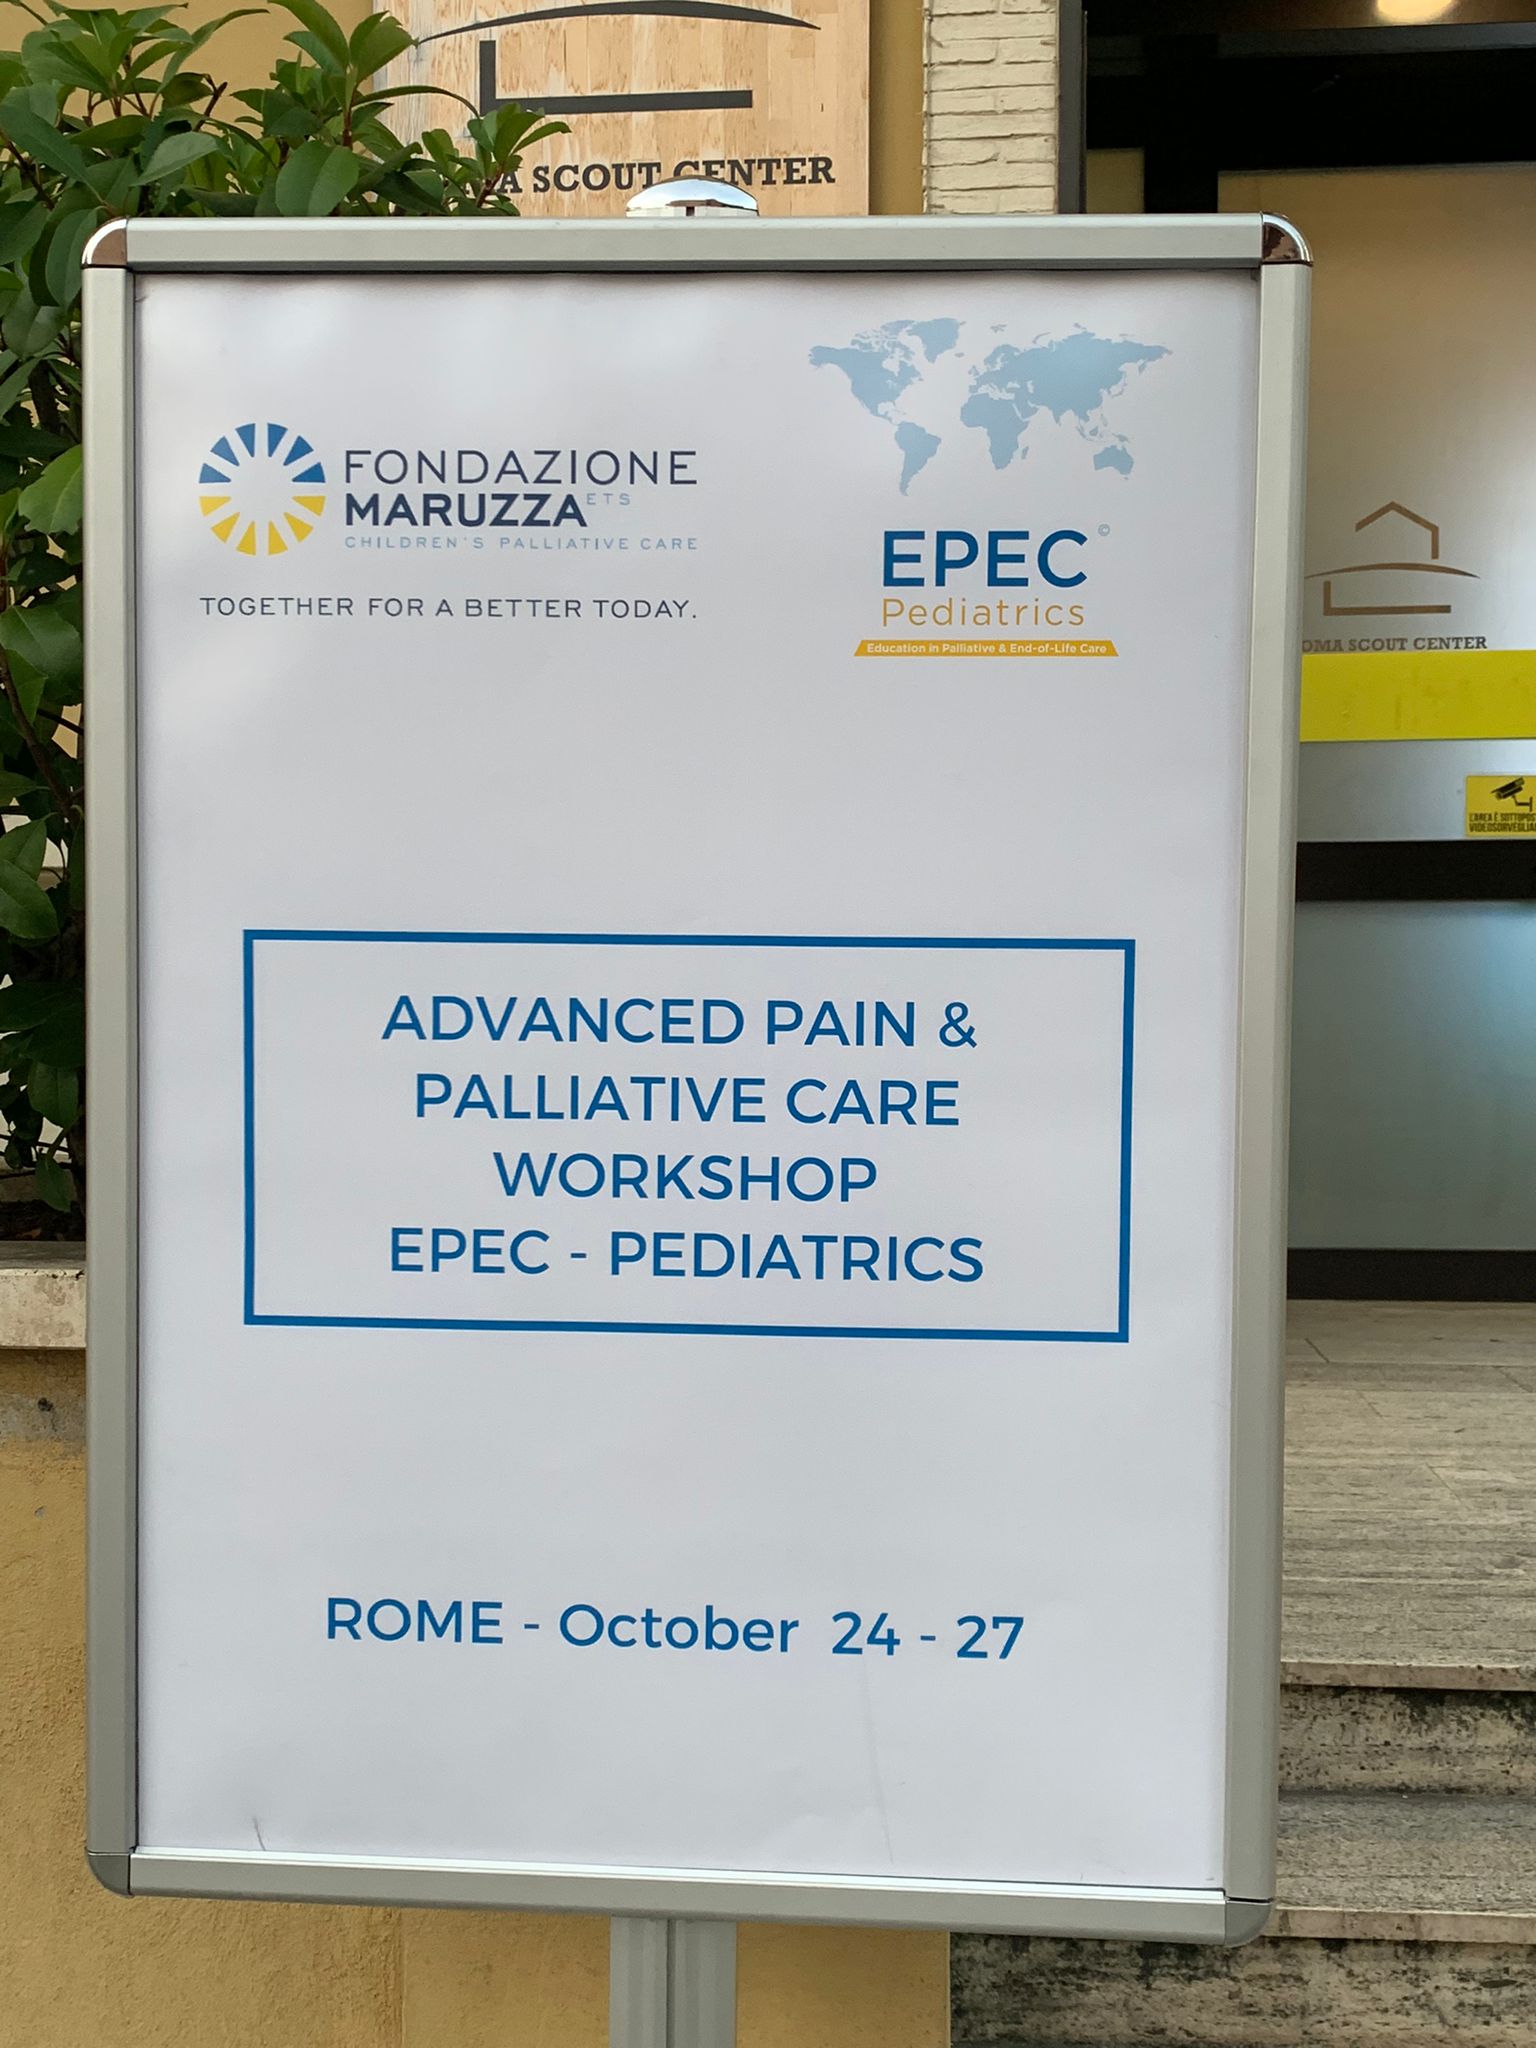 Featured image for “EPEC Pediatrics Advanced Pain and Palliative Care Workshop”